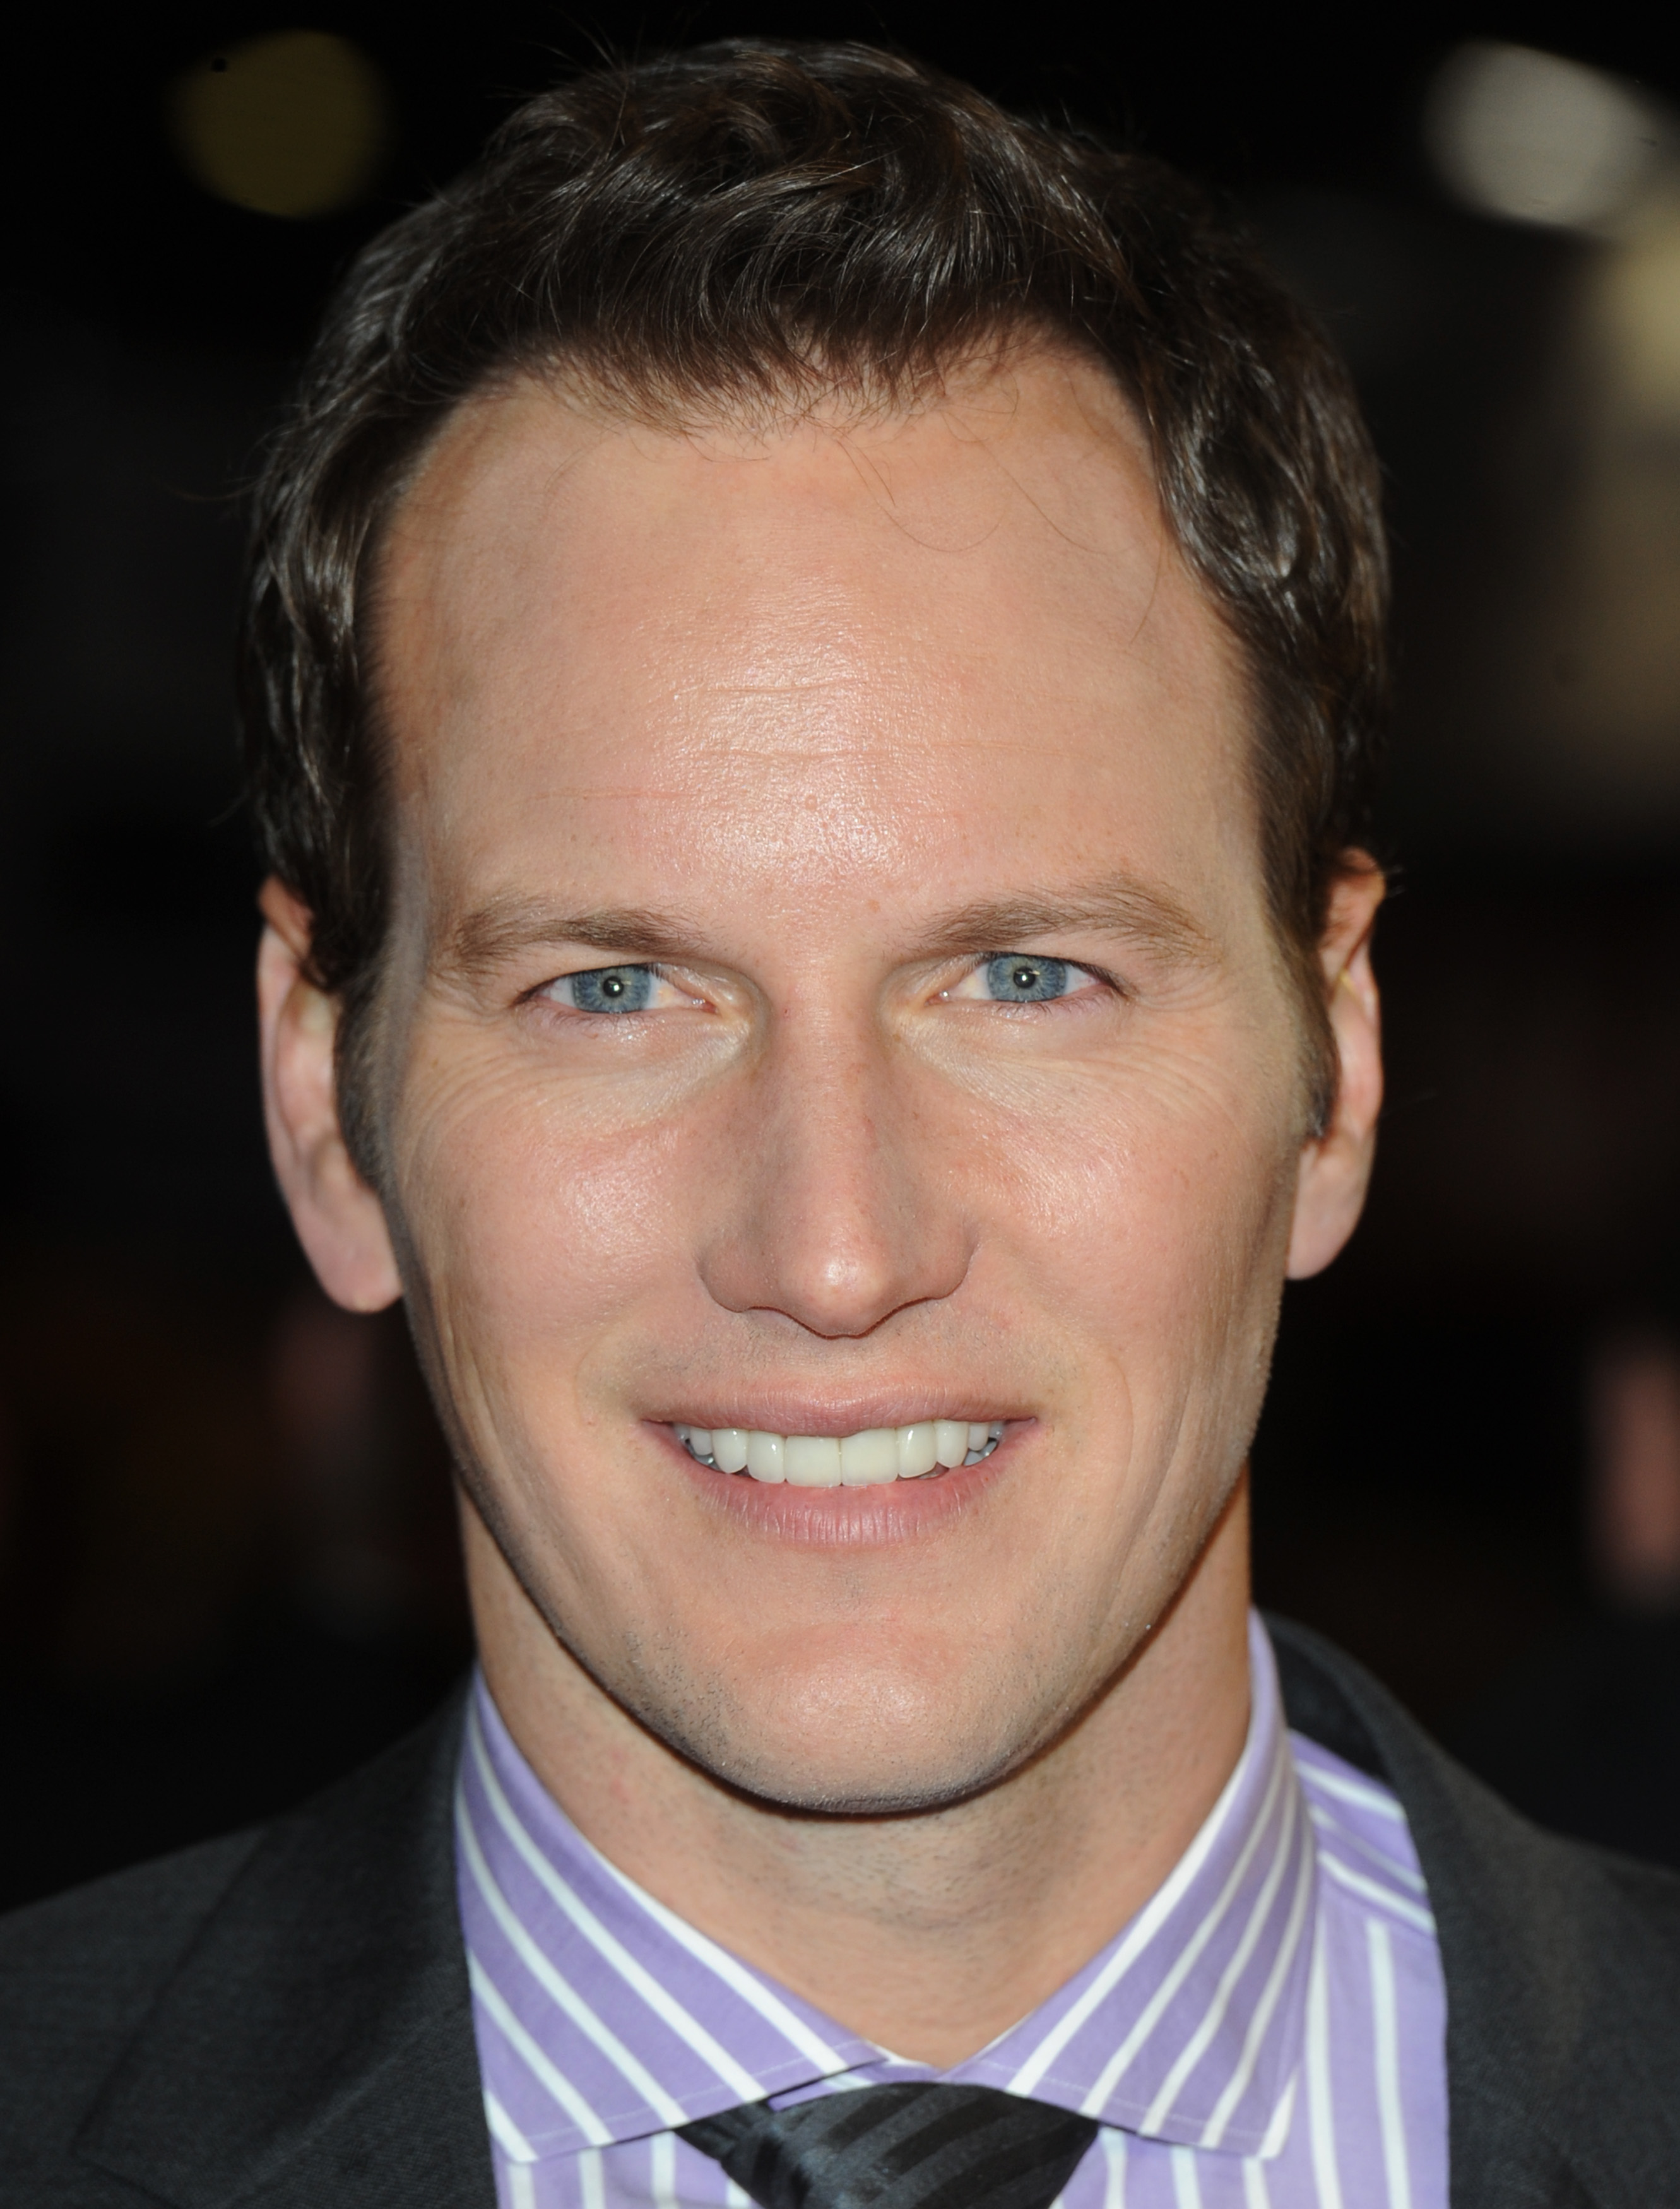 patrick-wilson-american-actor-images